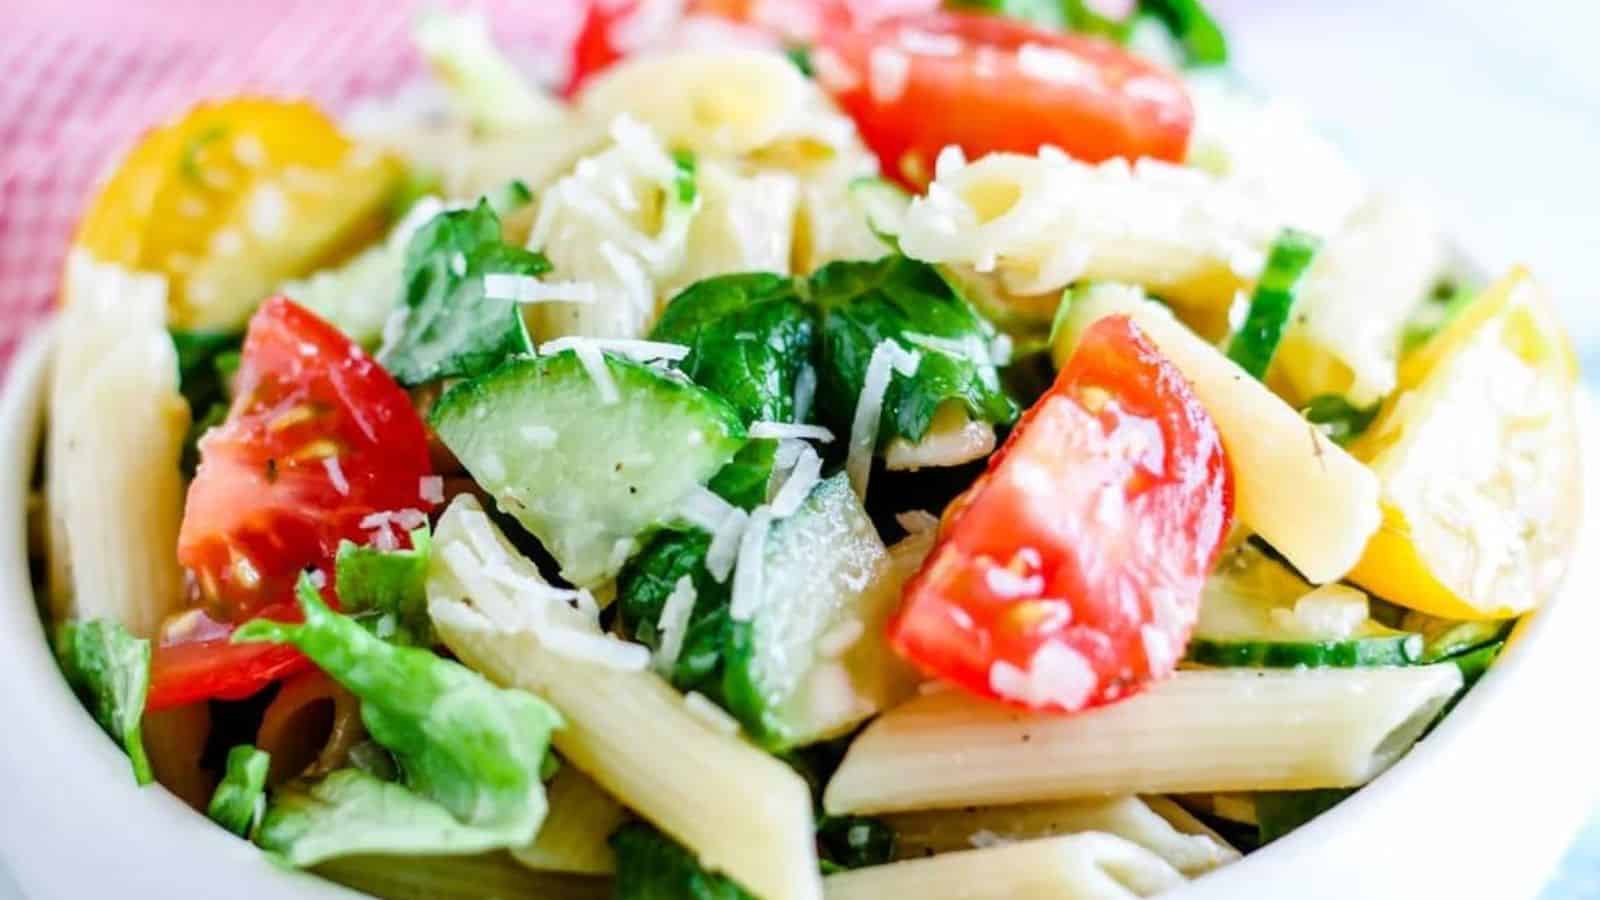 A bowl of pasta salad with fresh greens and veggies.